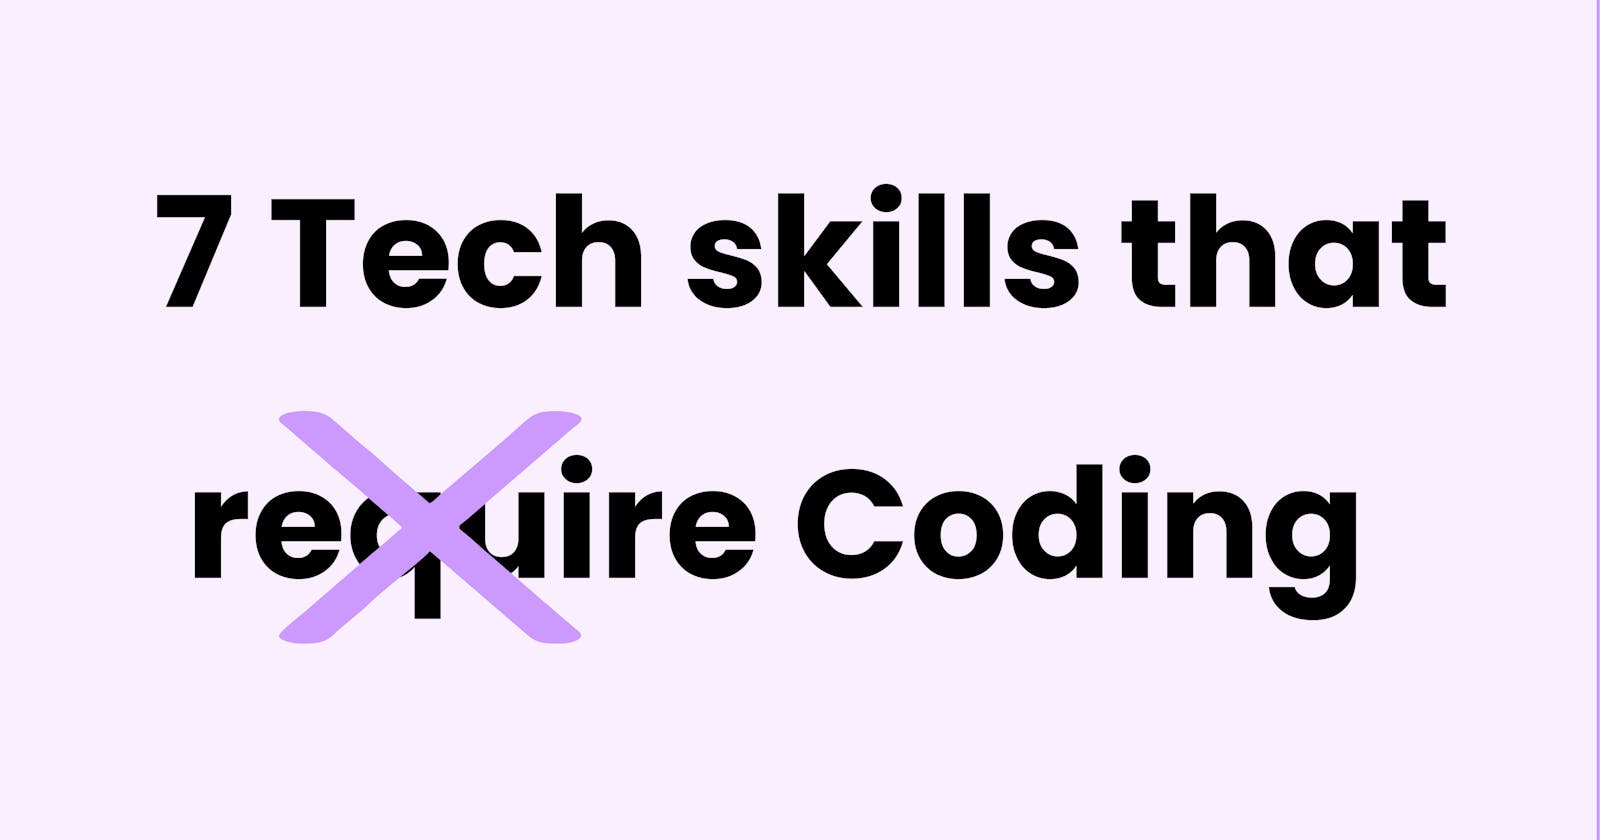 7 Tech skills that do not require coding